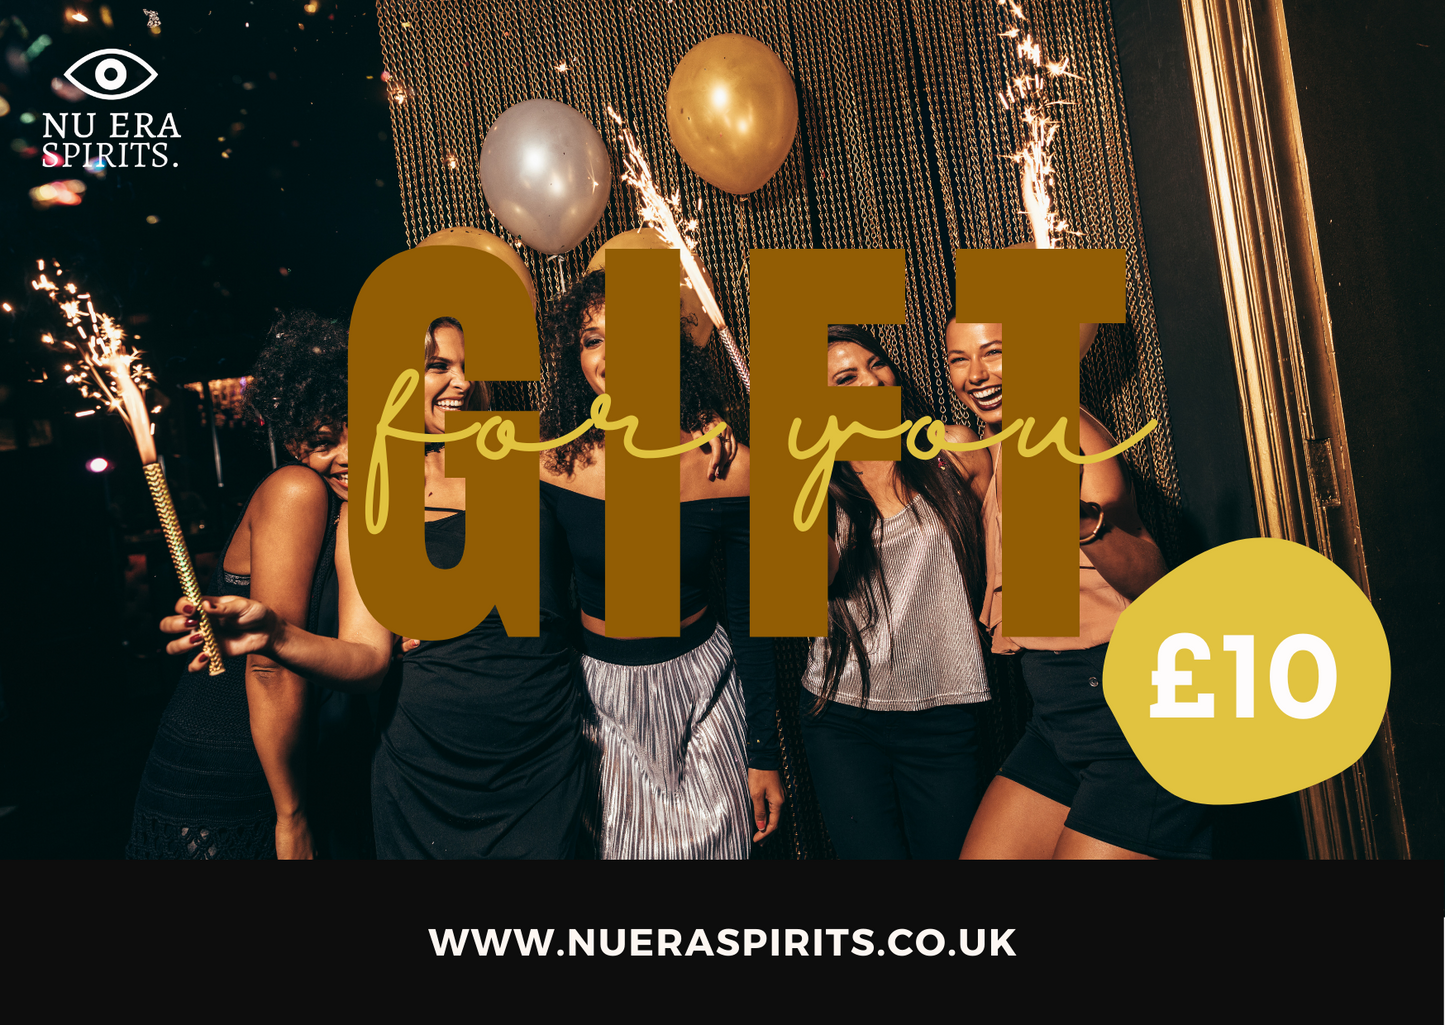 NU ERA SPIRITS Gift Card (available in denominations of £10, £25, £50)